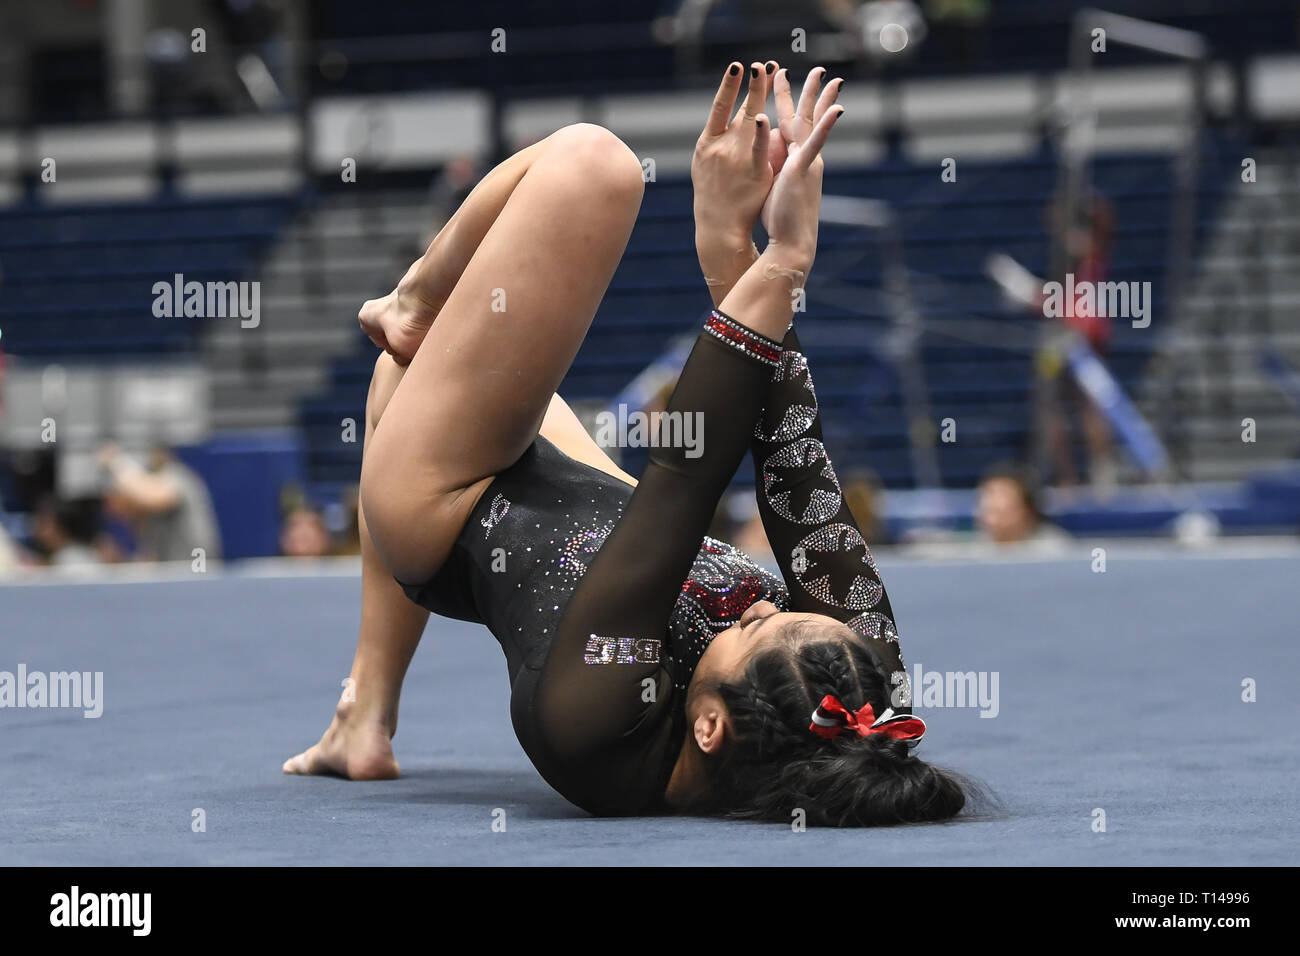 University Park, Pennsylvania, USA. 23rd Mar, 2019. DANICA ABANTO from the Ohio State competes on the floor exercise at Rec Hall in University Park, Pennsylvania. Credit: Amy Sanderson/ZUMA Wire/Alamy Live News Stock Photo